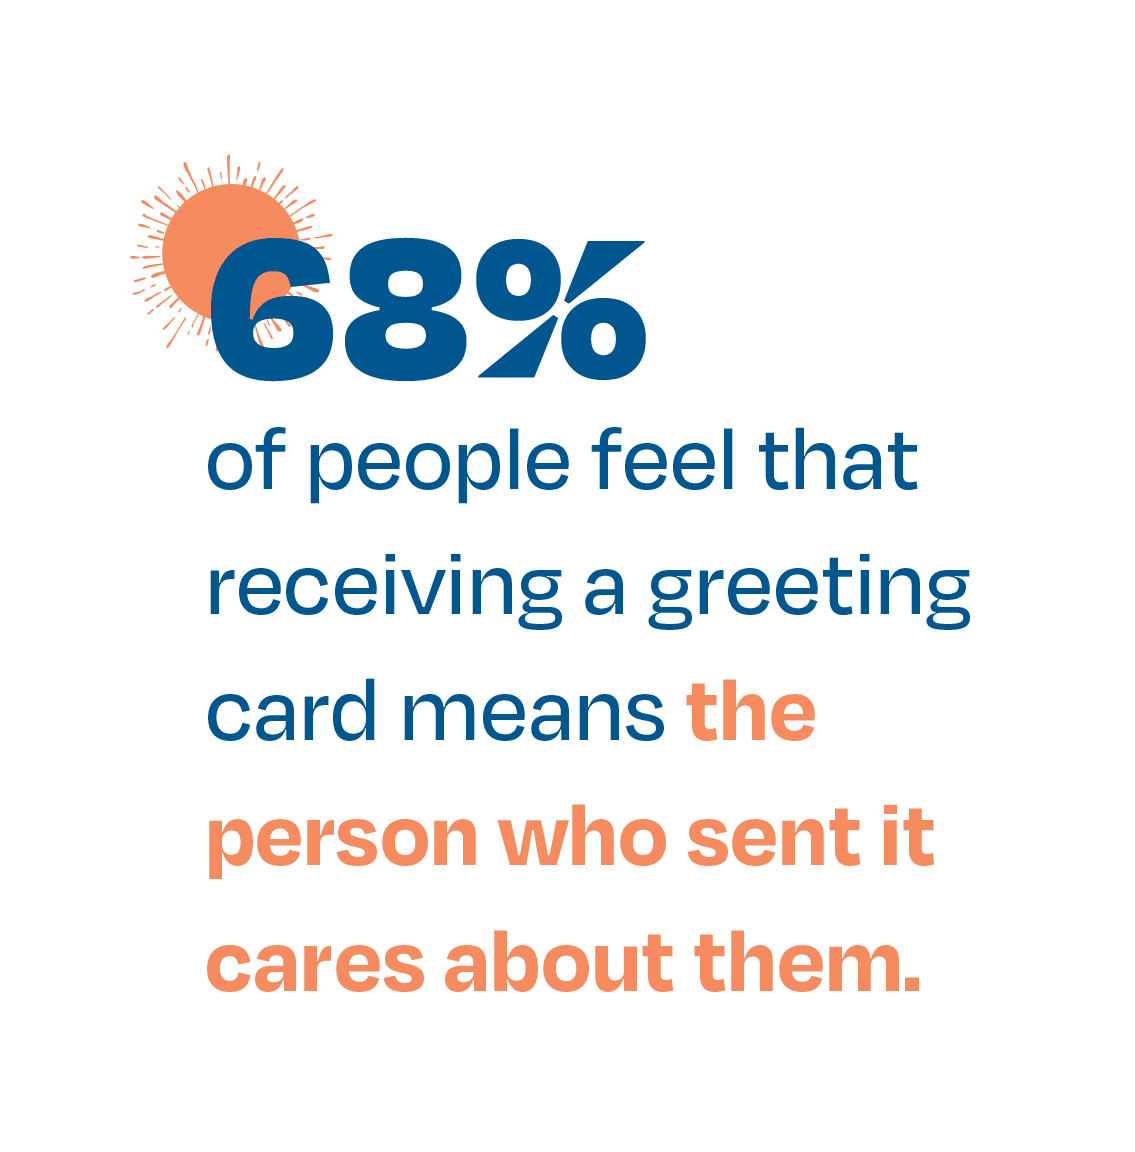 68% of people fell that receiving a greeting card means the person who sent it cares about them.